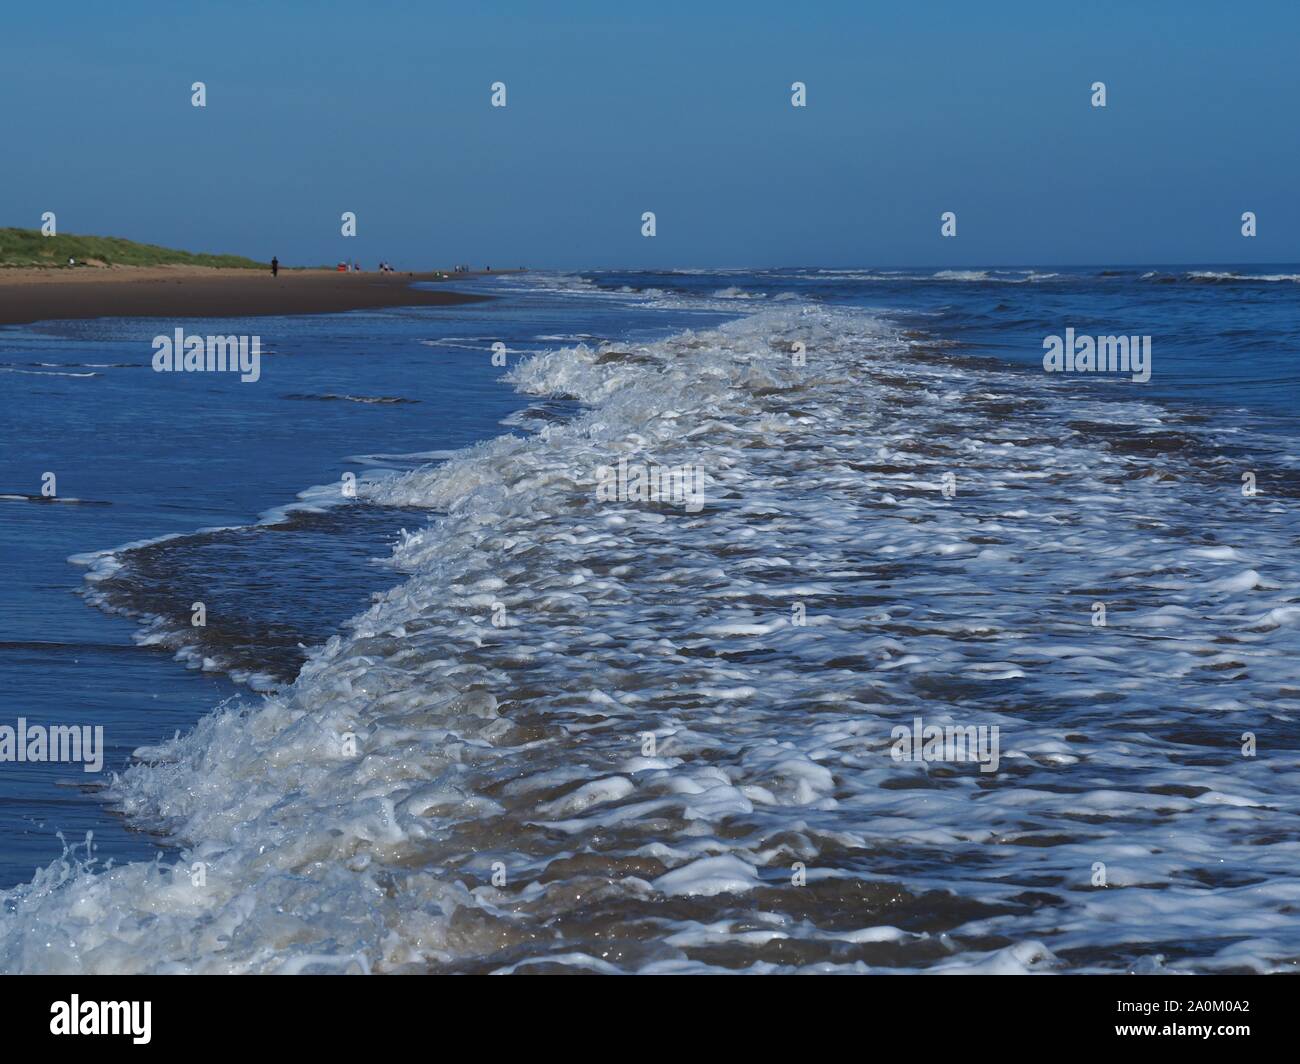 Breaking waves approaching the sandy beach at Mablethorpe, Lincolnshire, England, with a clear blue sky Stock Photo